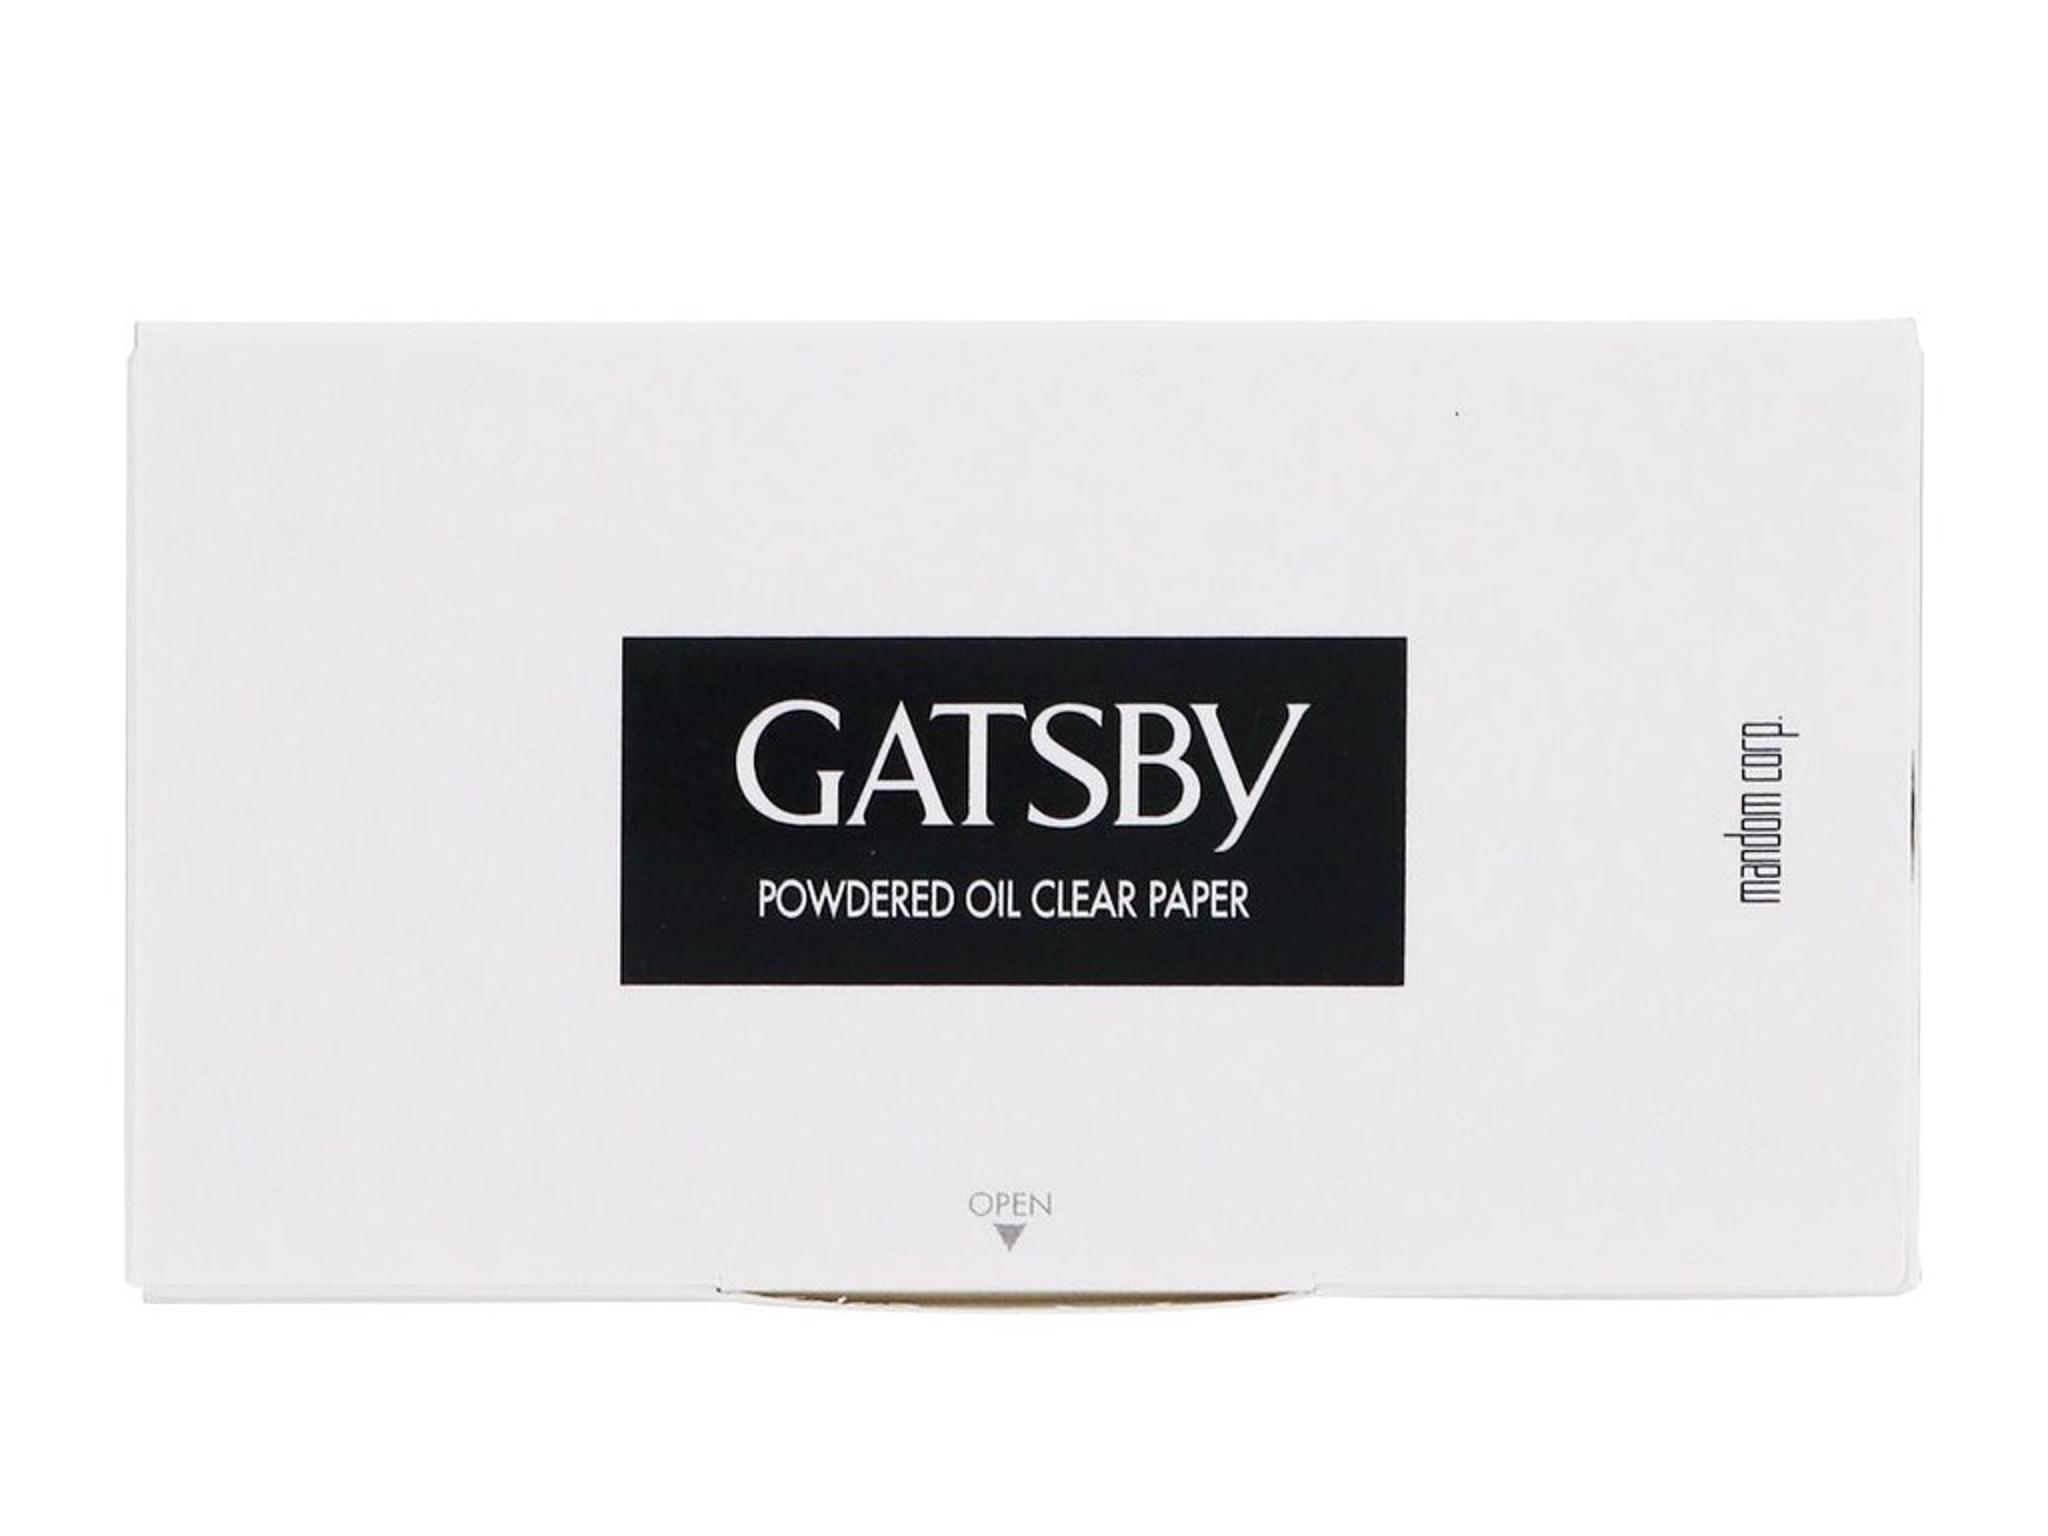 GATSBY - Powdered Oil Clear Paper - 70 Sheets 3501